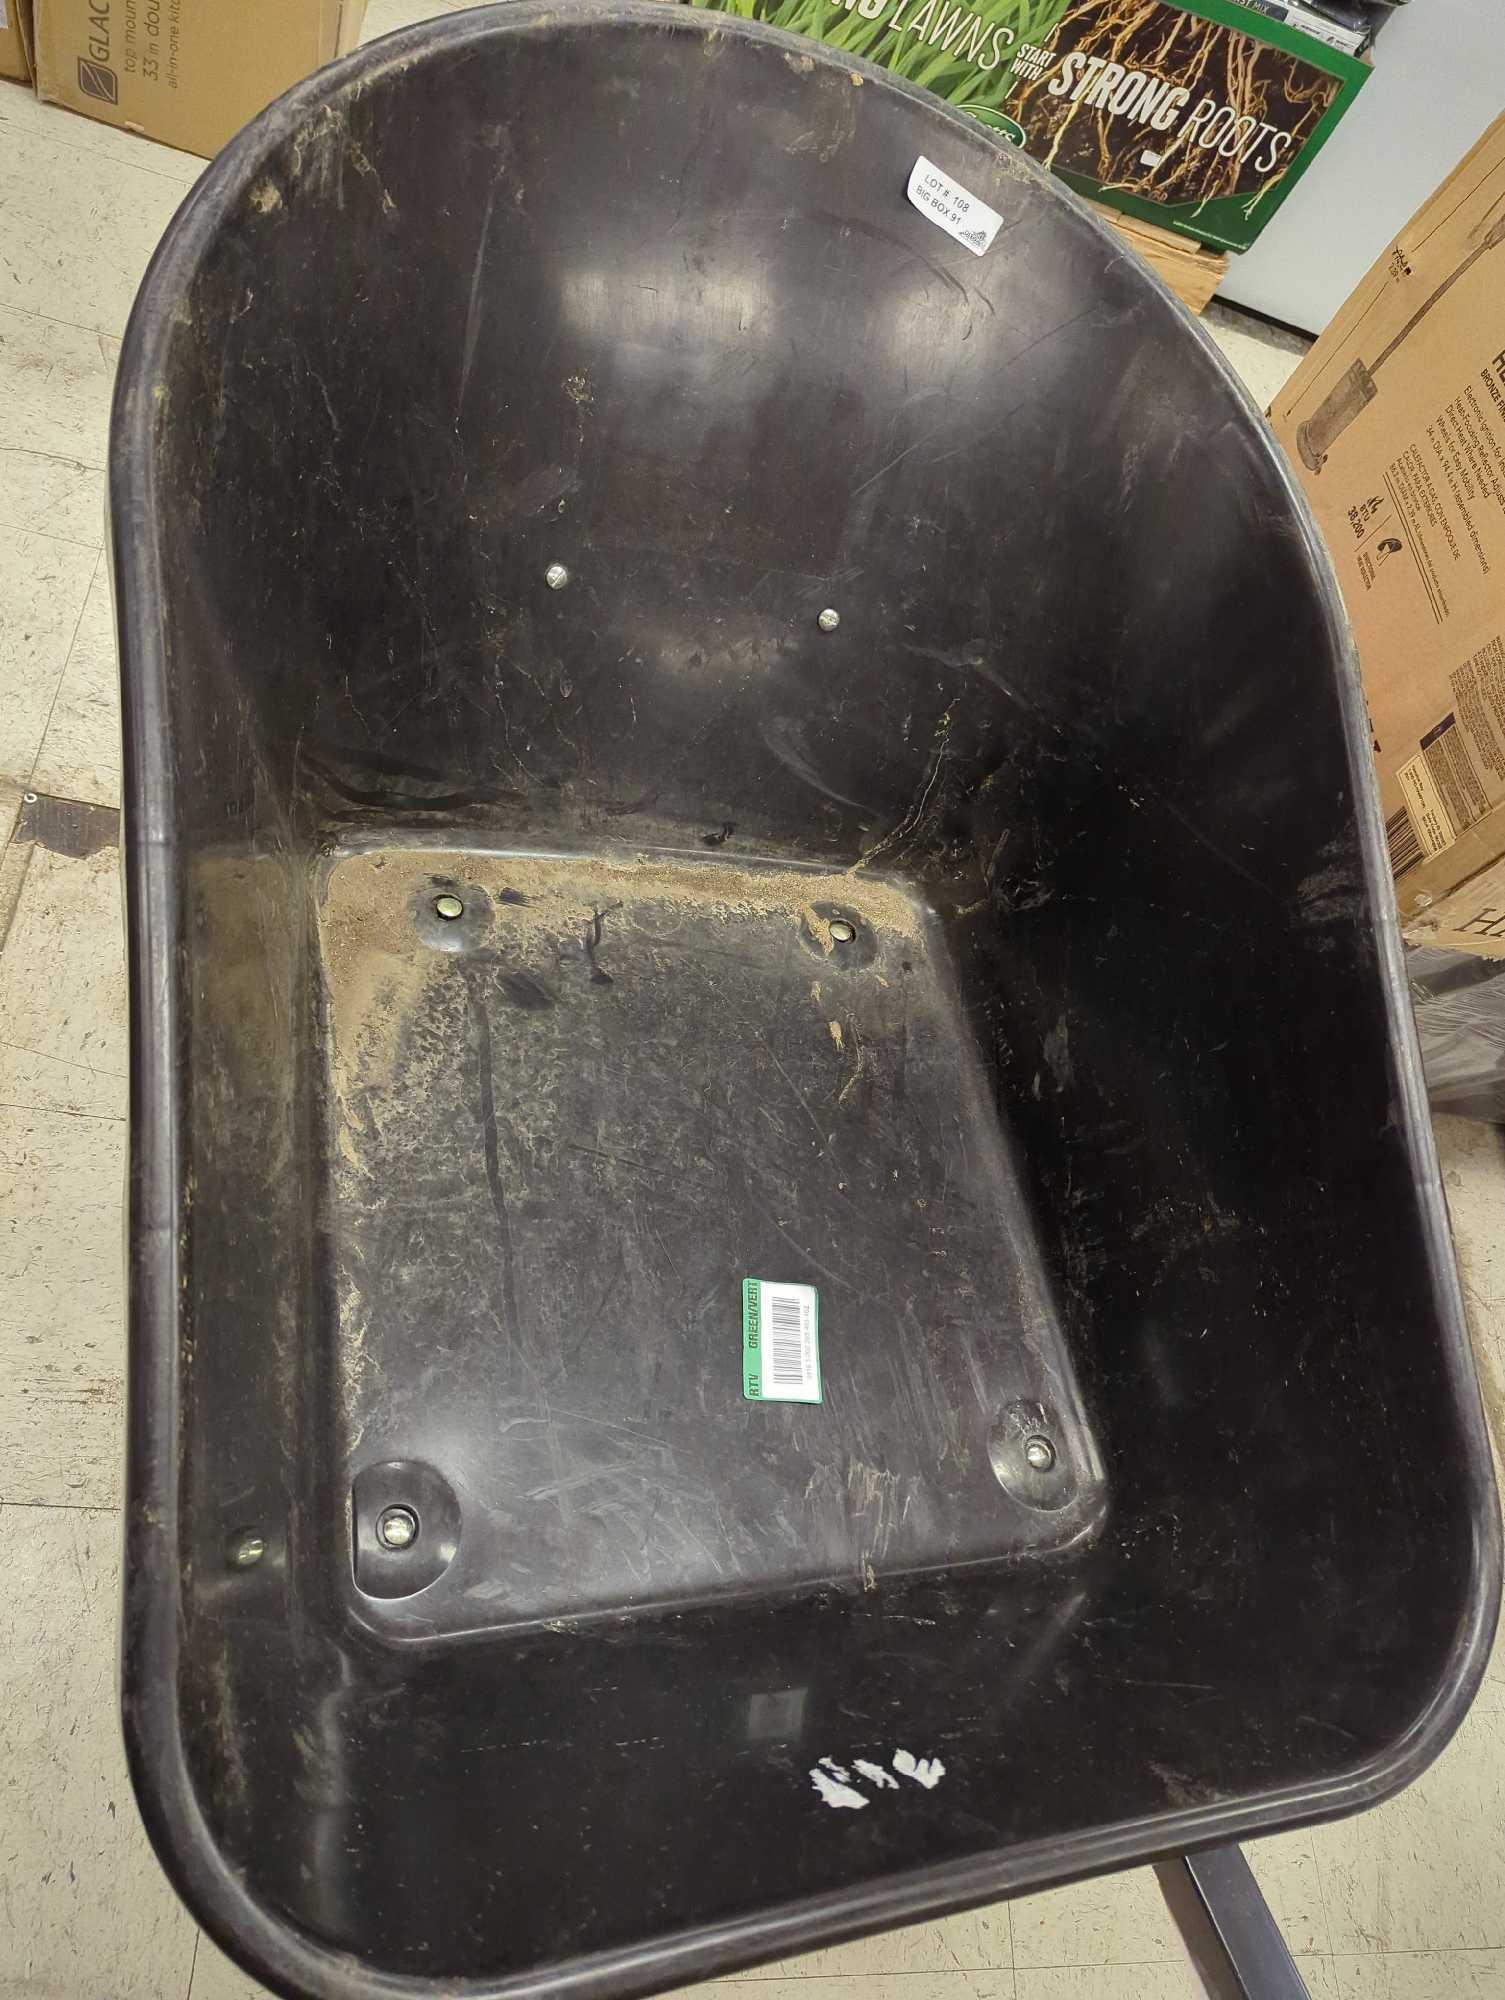 Husky Husky 6 cu. ft. Poly Wheelbarrow with Flat-Free Tires. Thumbs as is shown in photos. Appears